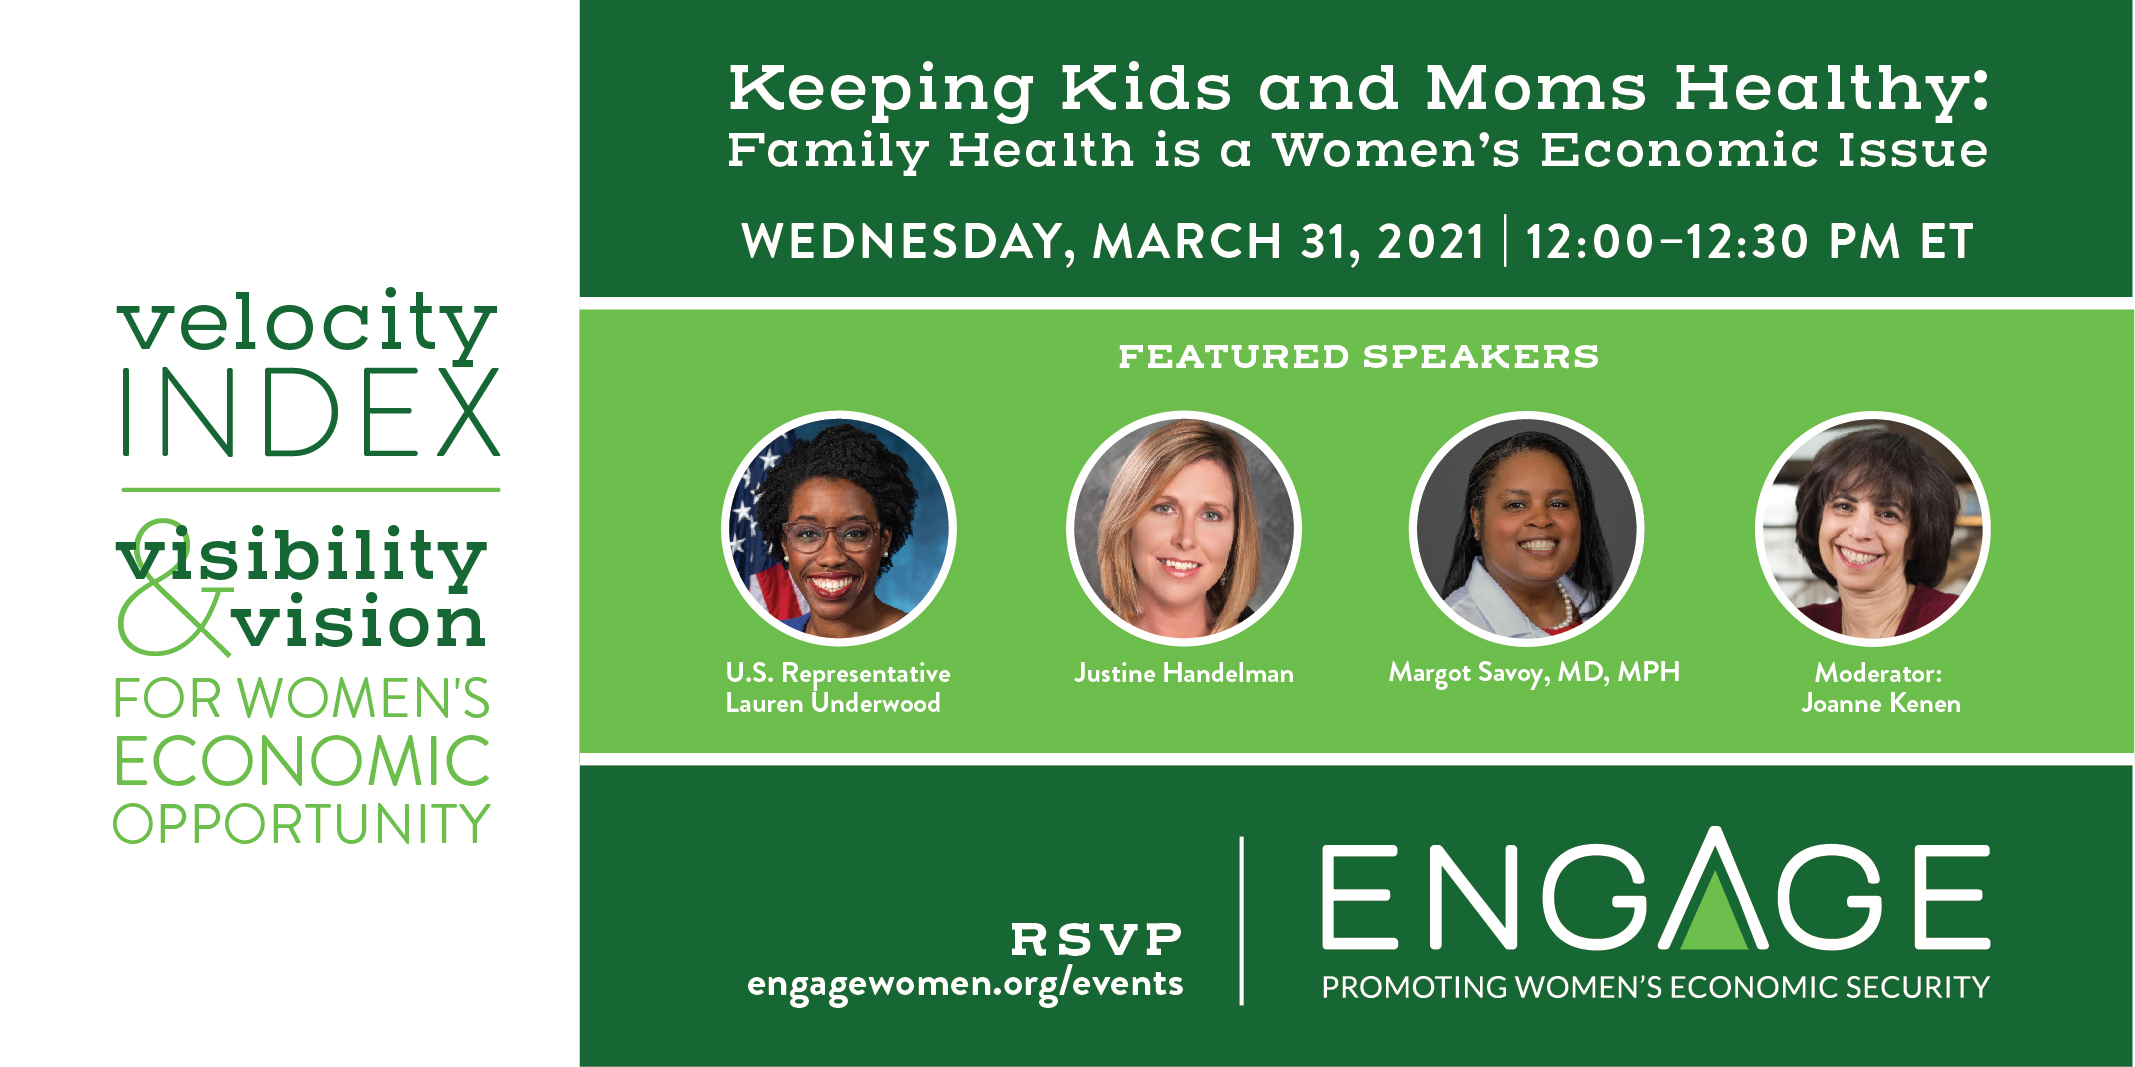 March 31, 2021 | Keeping Kids and Moms Healthy: Family Health is a Women’s Economic Issue